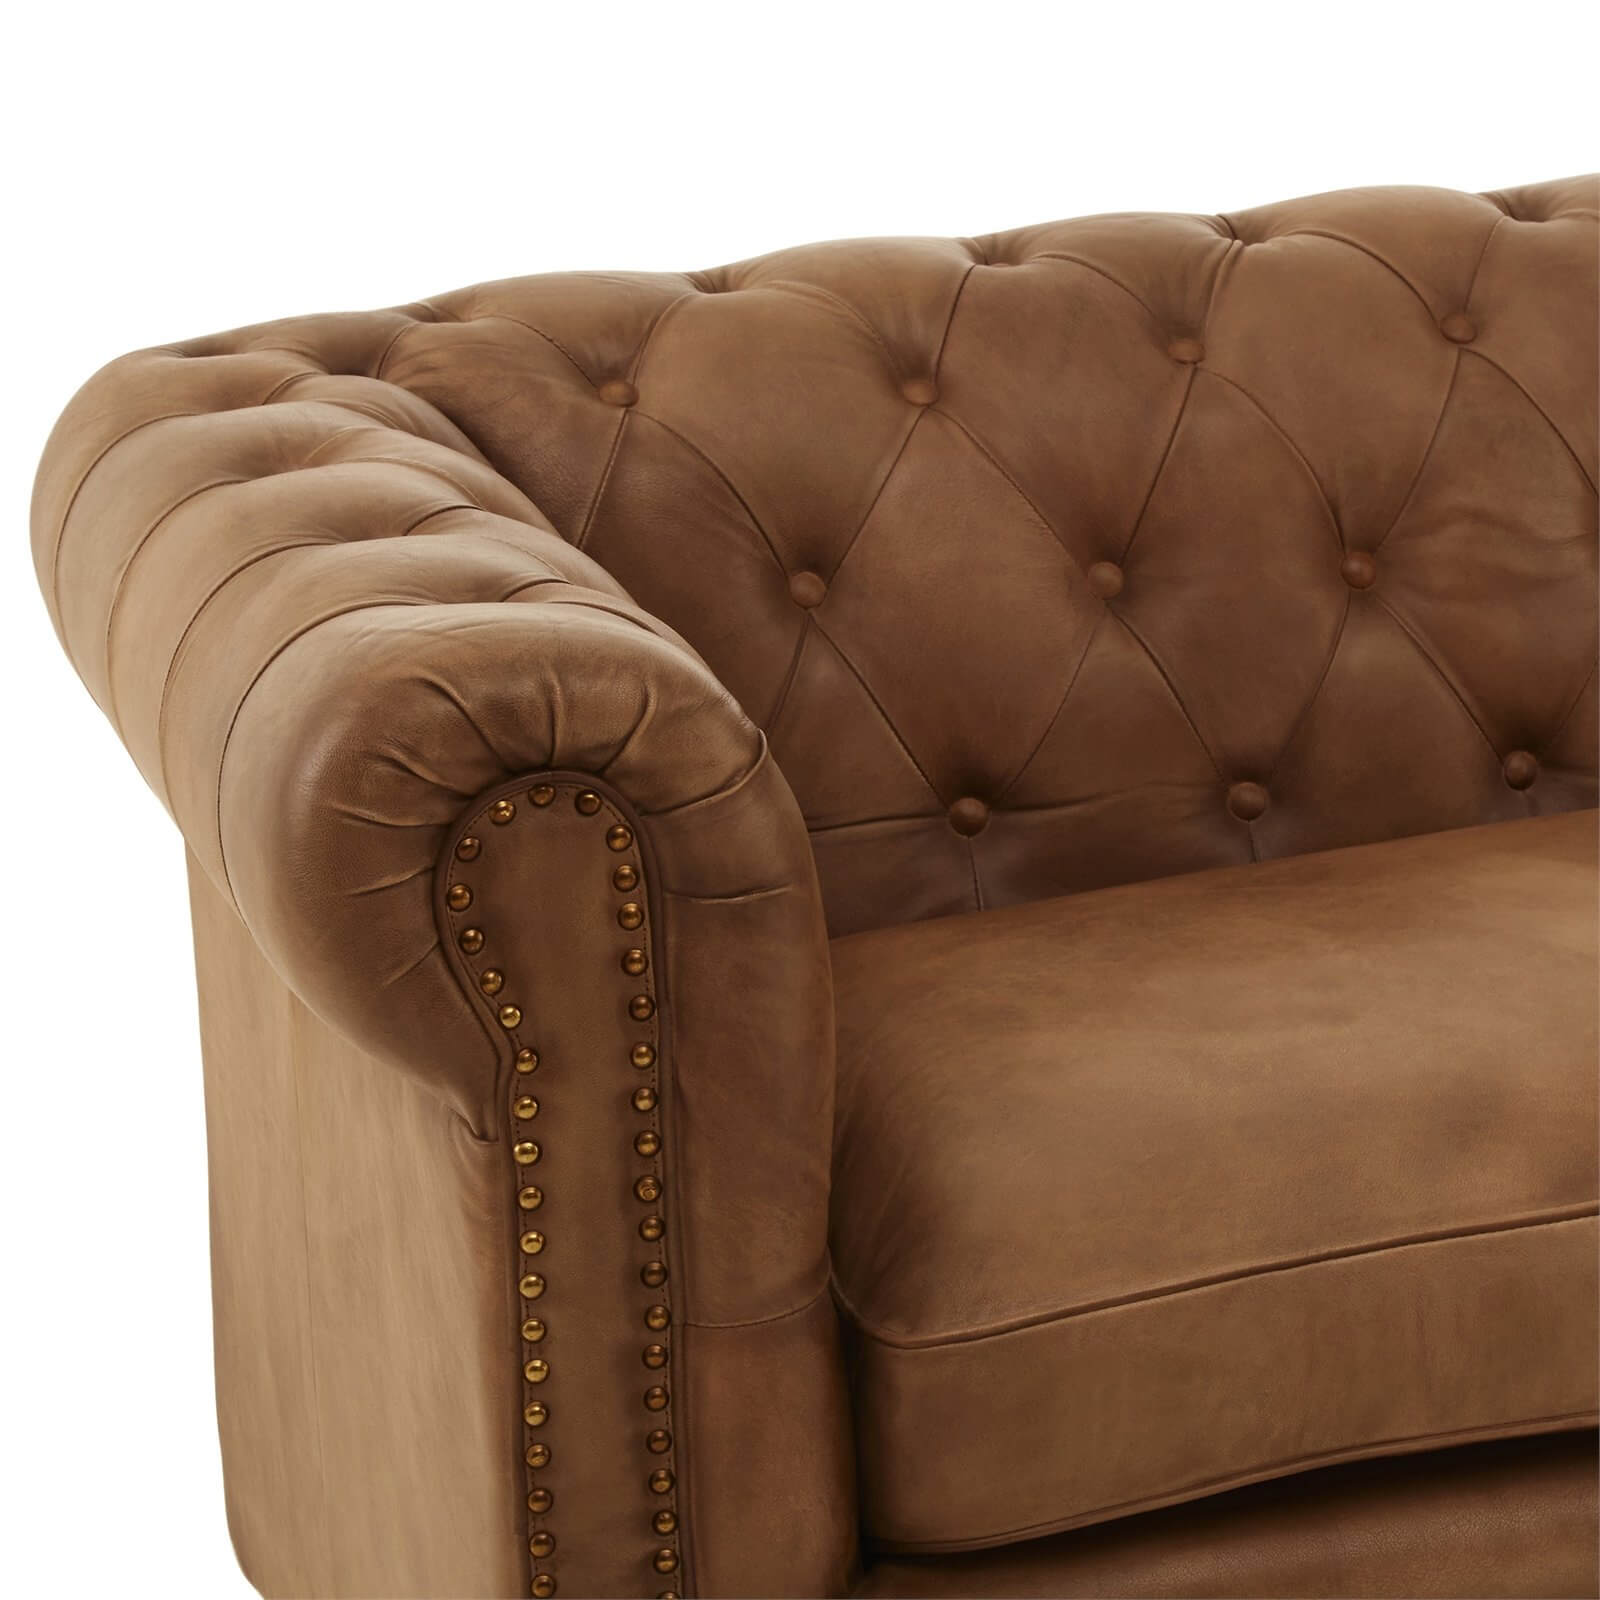 Buffalo 3 Seat Chesterfield - Brown